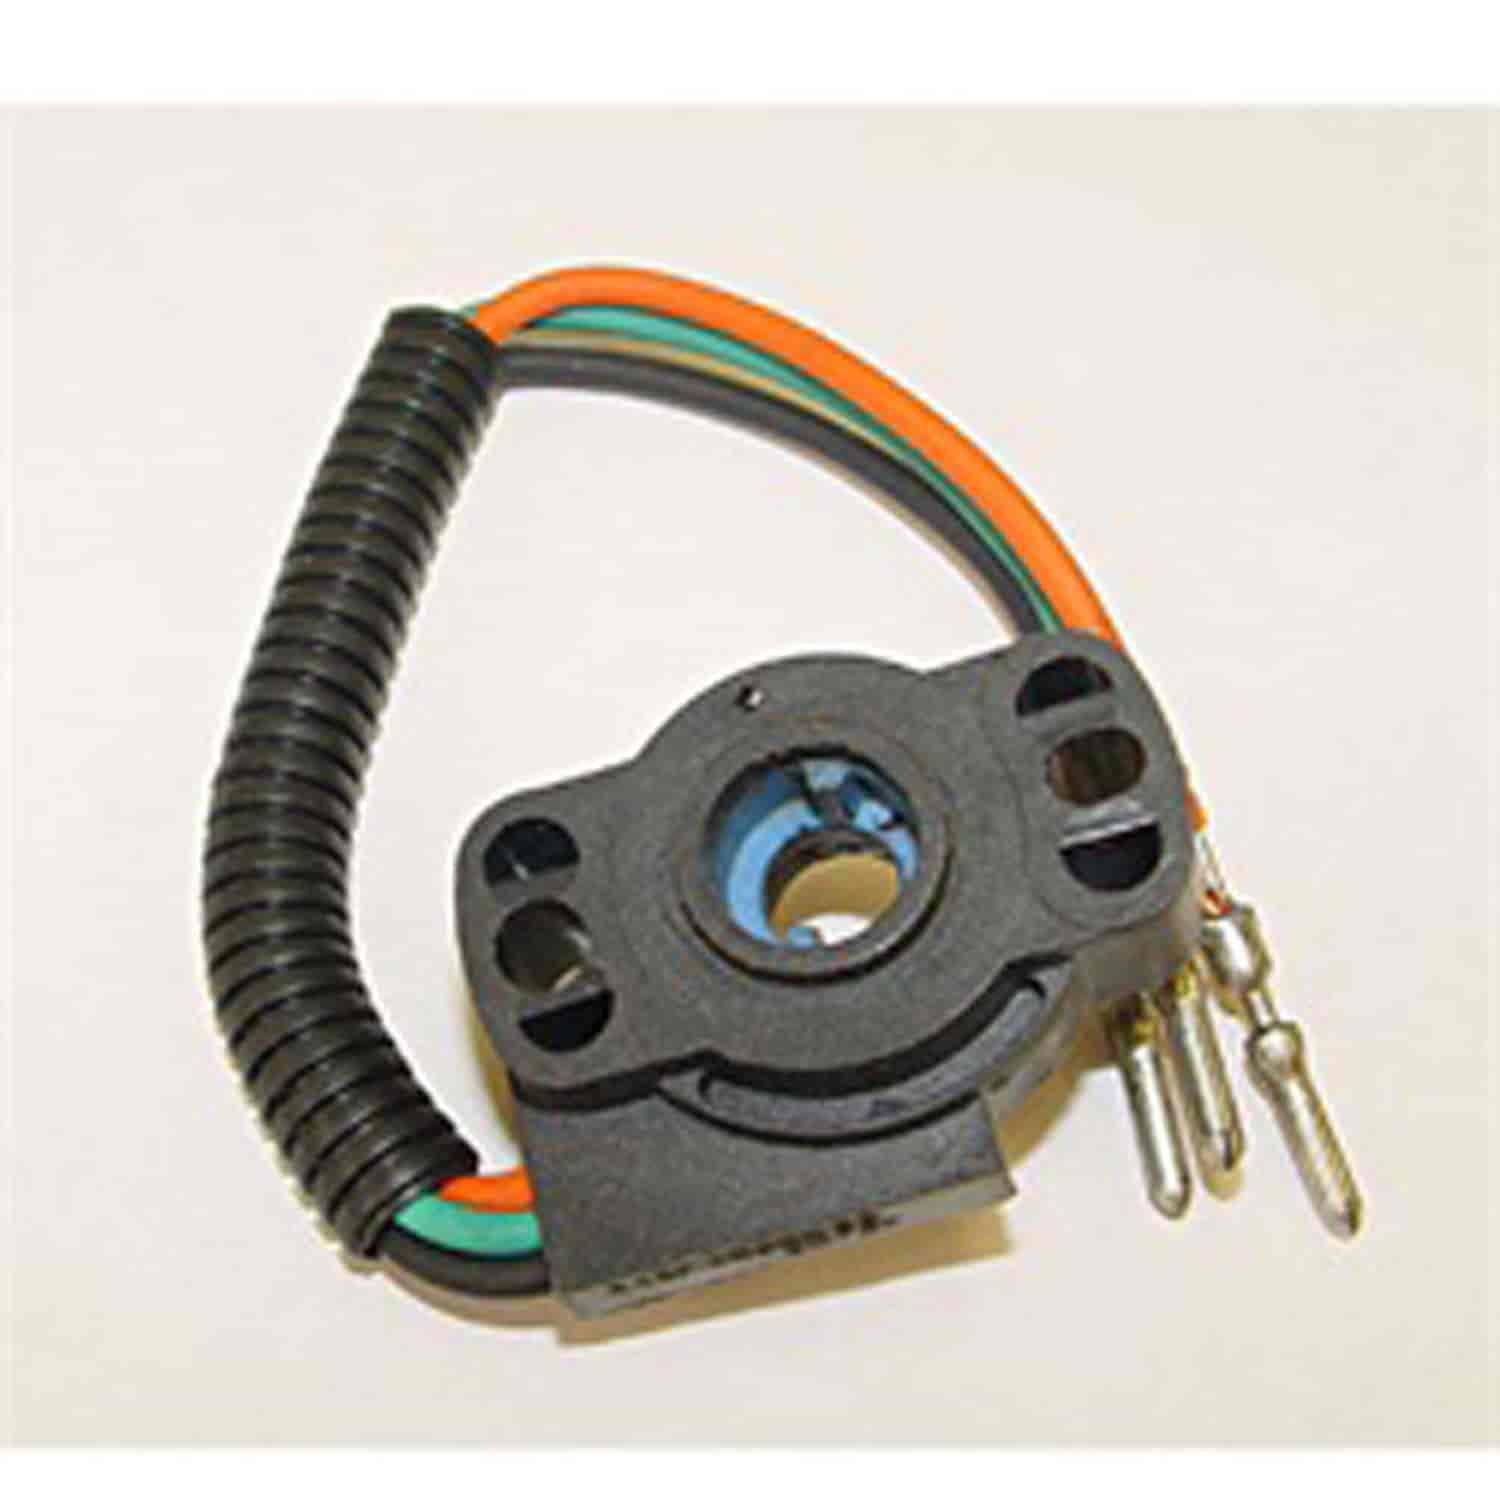 This throttle position sensor from Omix-ADA fits 97-98 Jeep Grand Cherokees with a 5.2 liter engine